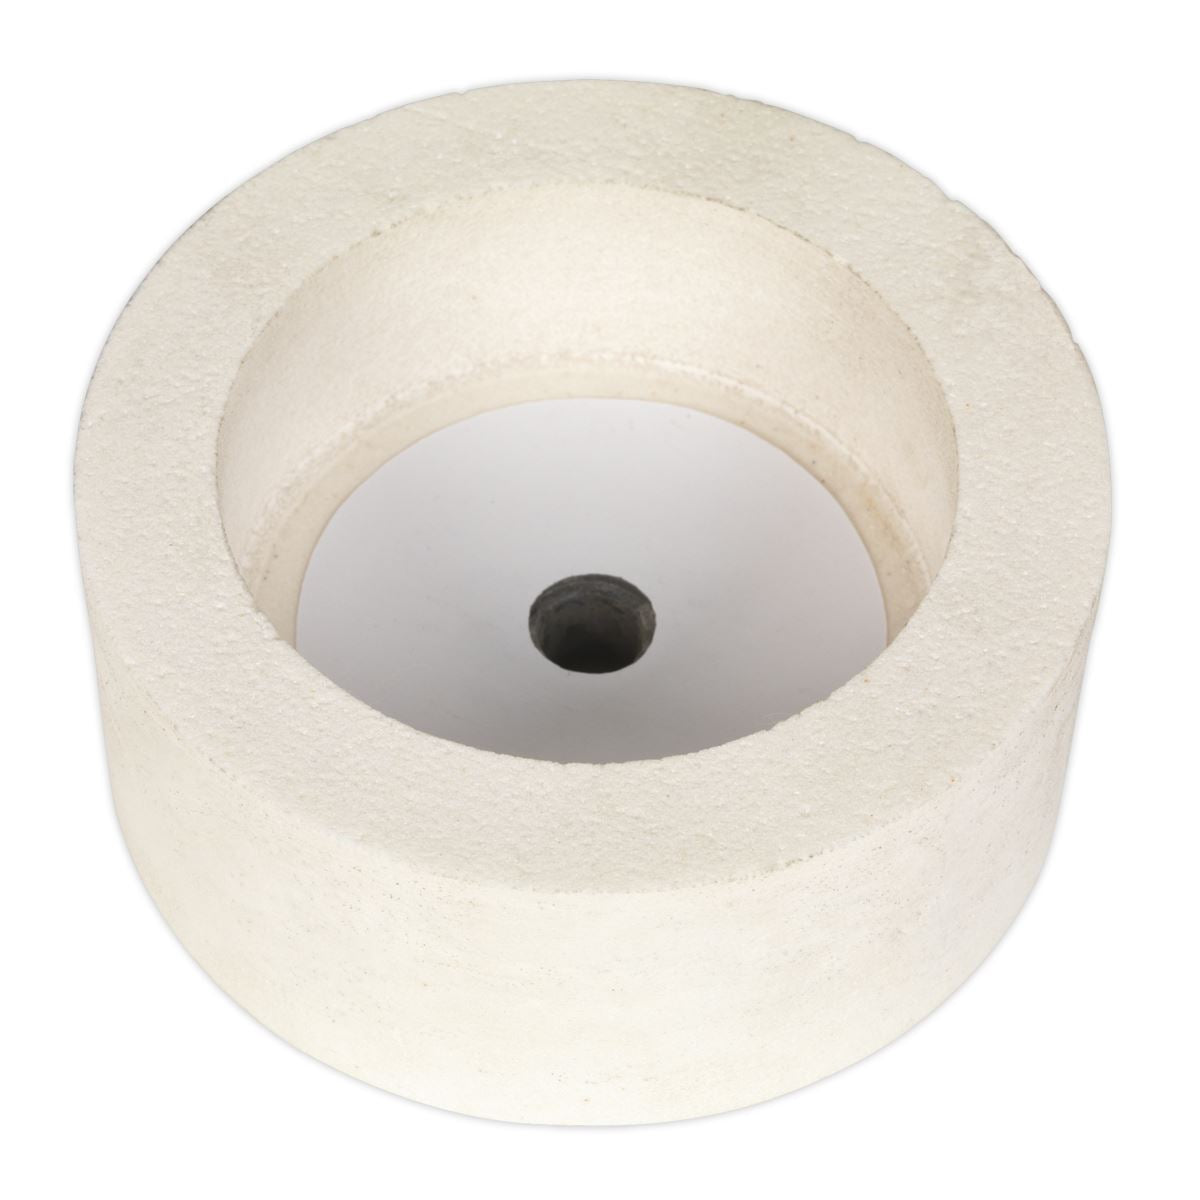 Sealey Dry Stone Wheel Ø125mm for SMS2107